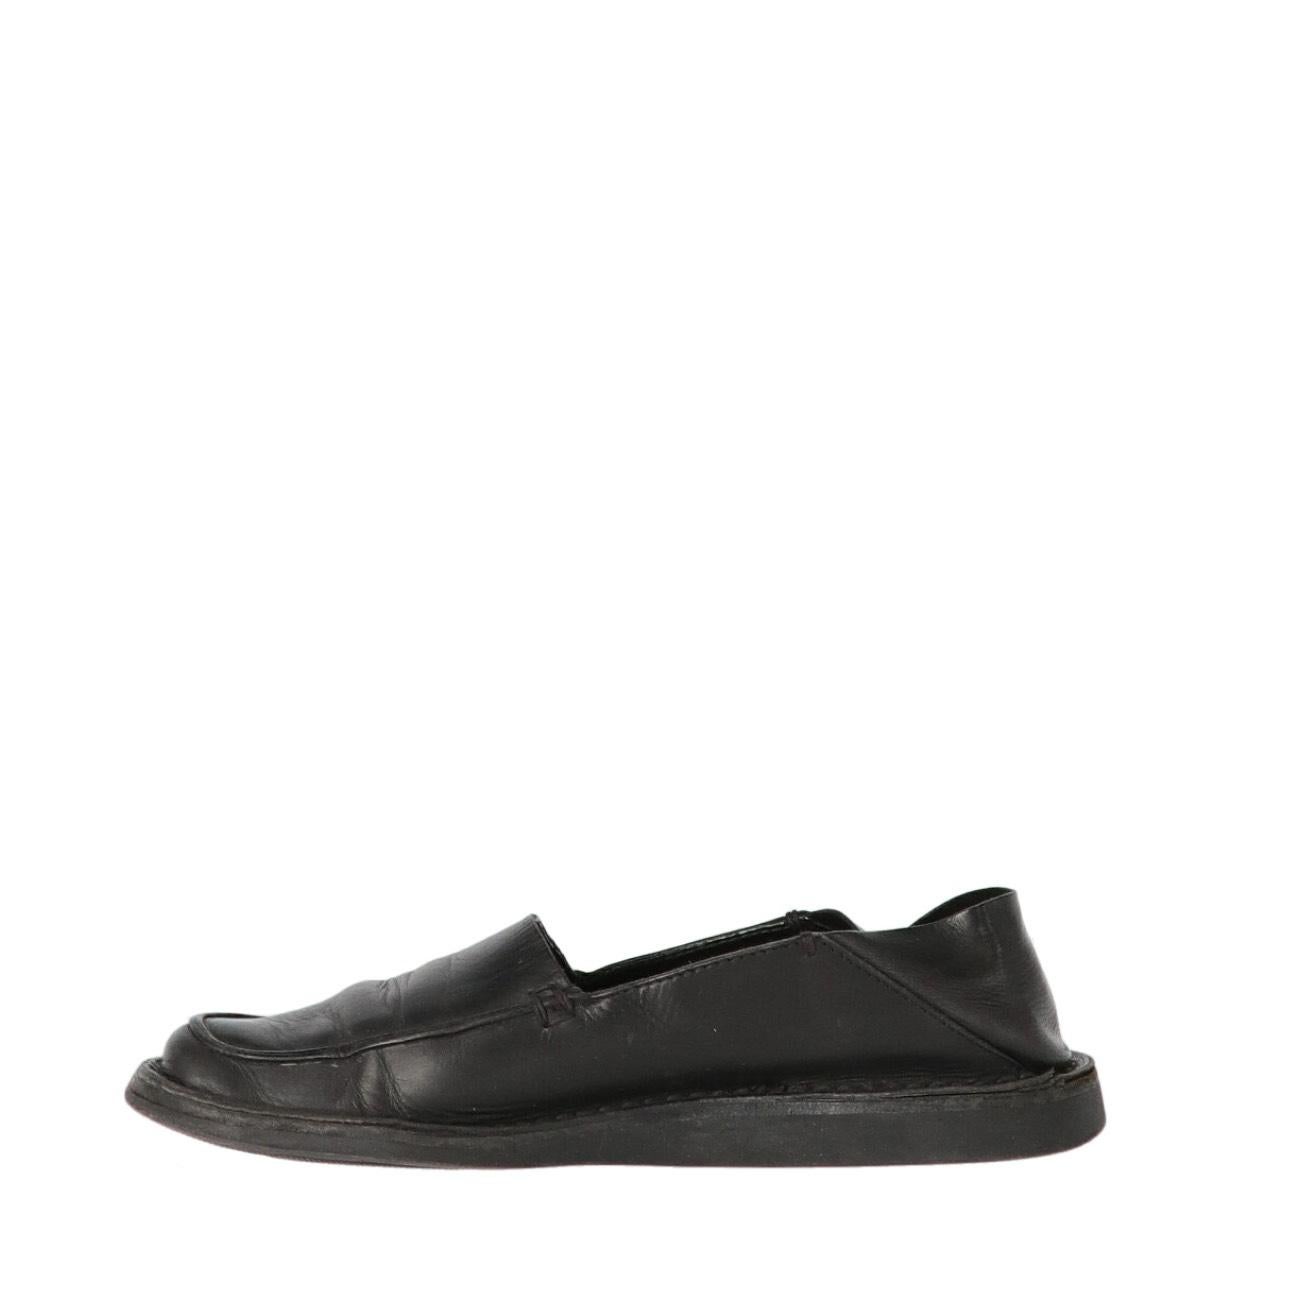 Prada black soft and supple leather loafers. This loafer is designed to be worn with the heel folded down as a slipper or up as a loafer.

The shoes show signs of wear and wrinkles on the leather, as shown in the pictures.
Years: 90s

Made in